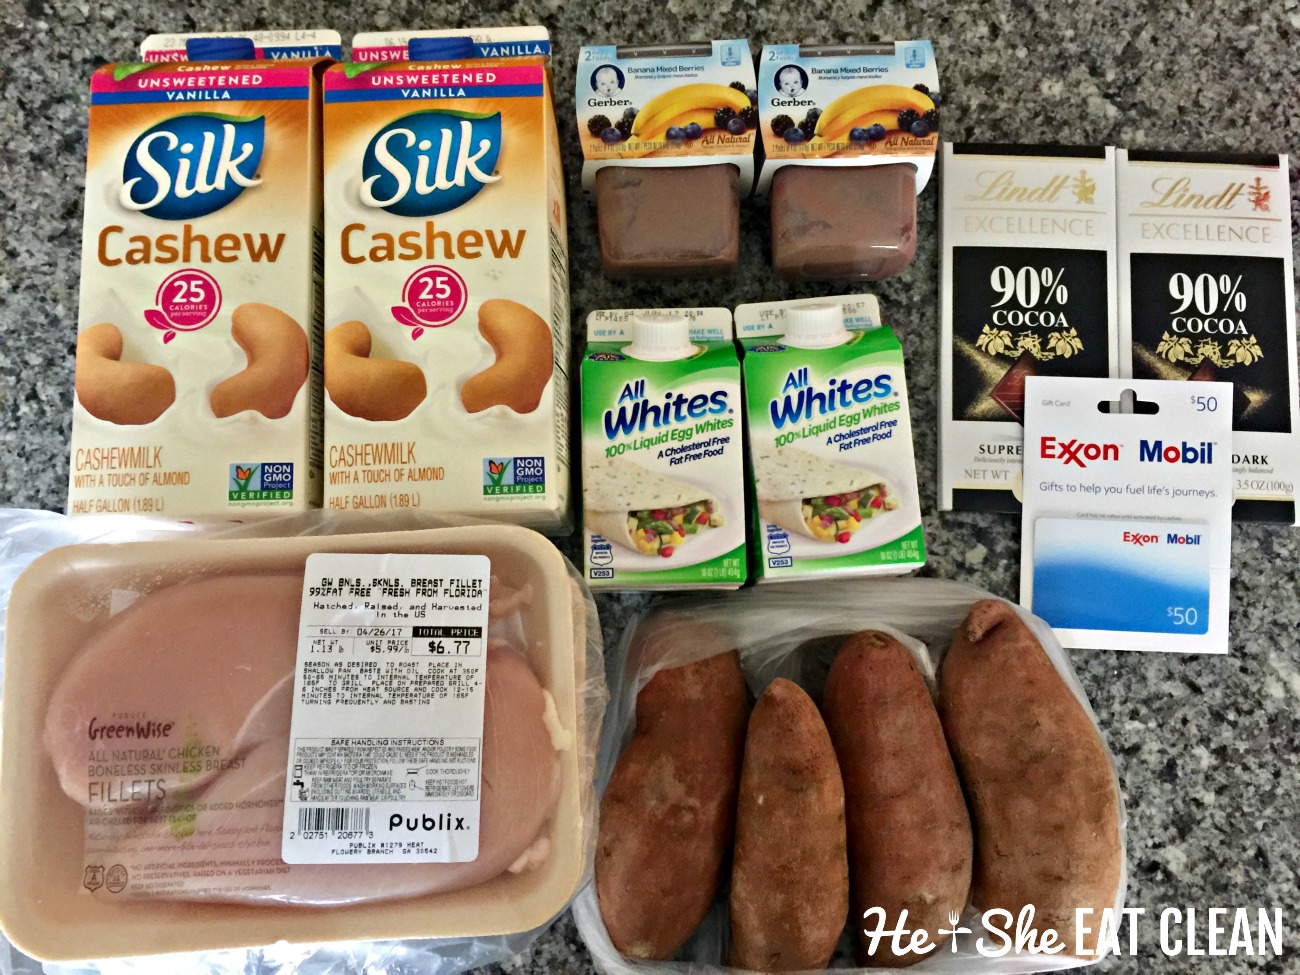  Clean Eating Grocery Shopping at Publix | He and She Eat Clean 